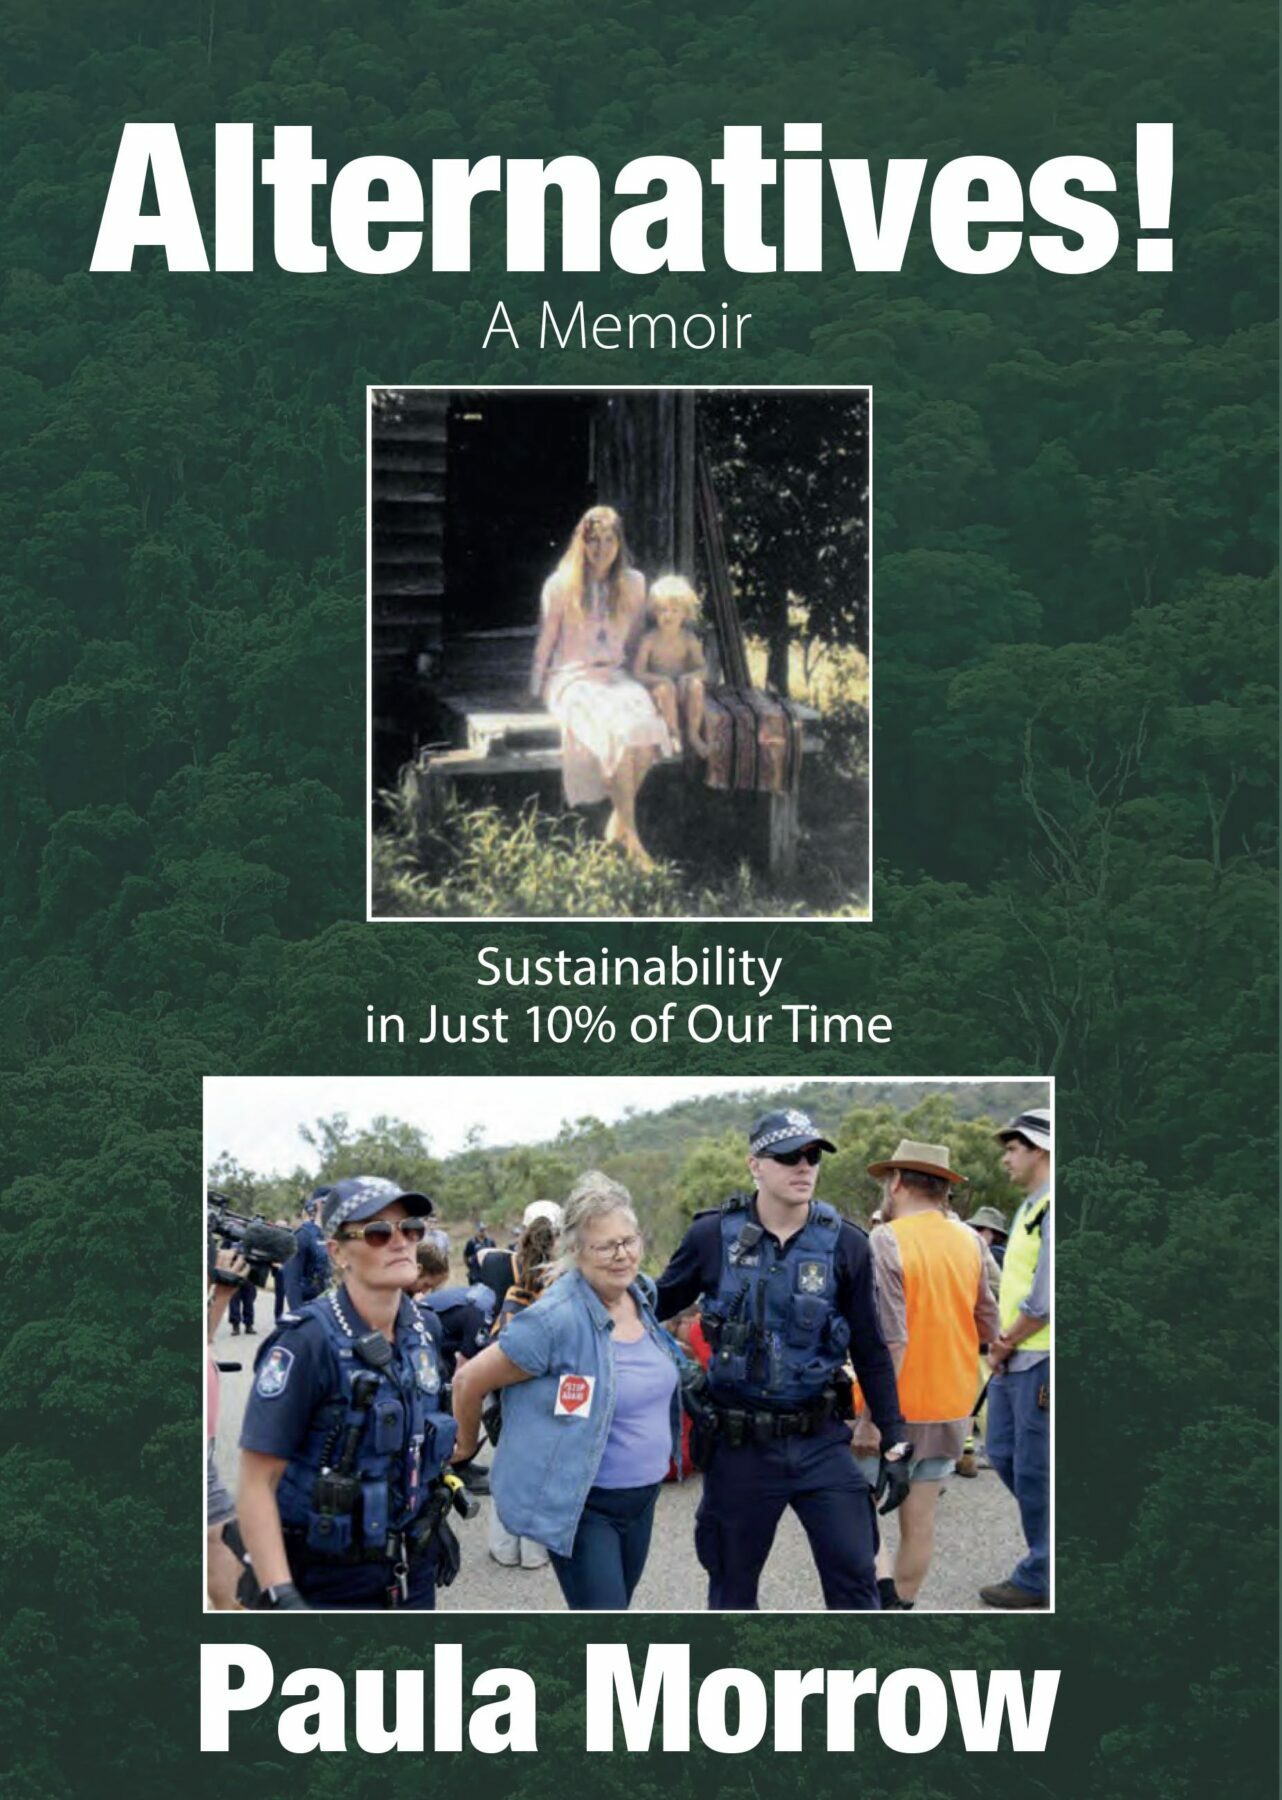 A green book cover with the title and author's name in white texts and two central photographs, a woman and child sitting outdoors, and a woman flanked by two police officers moving through a crowd